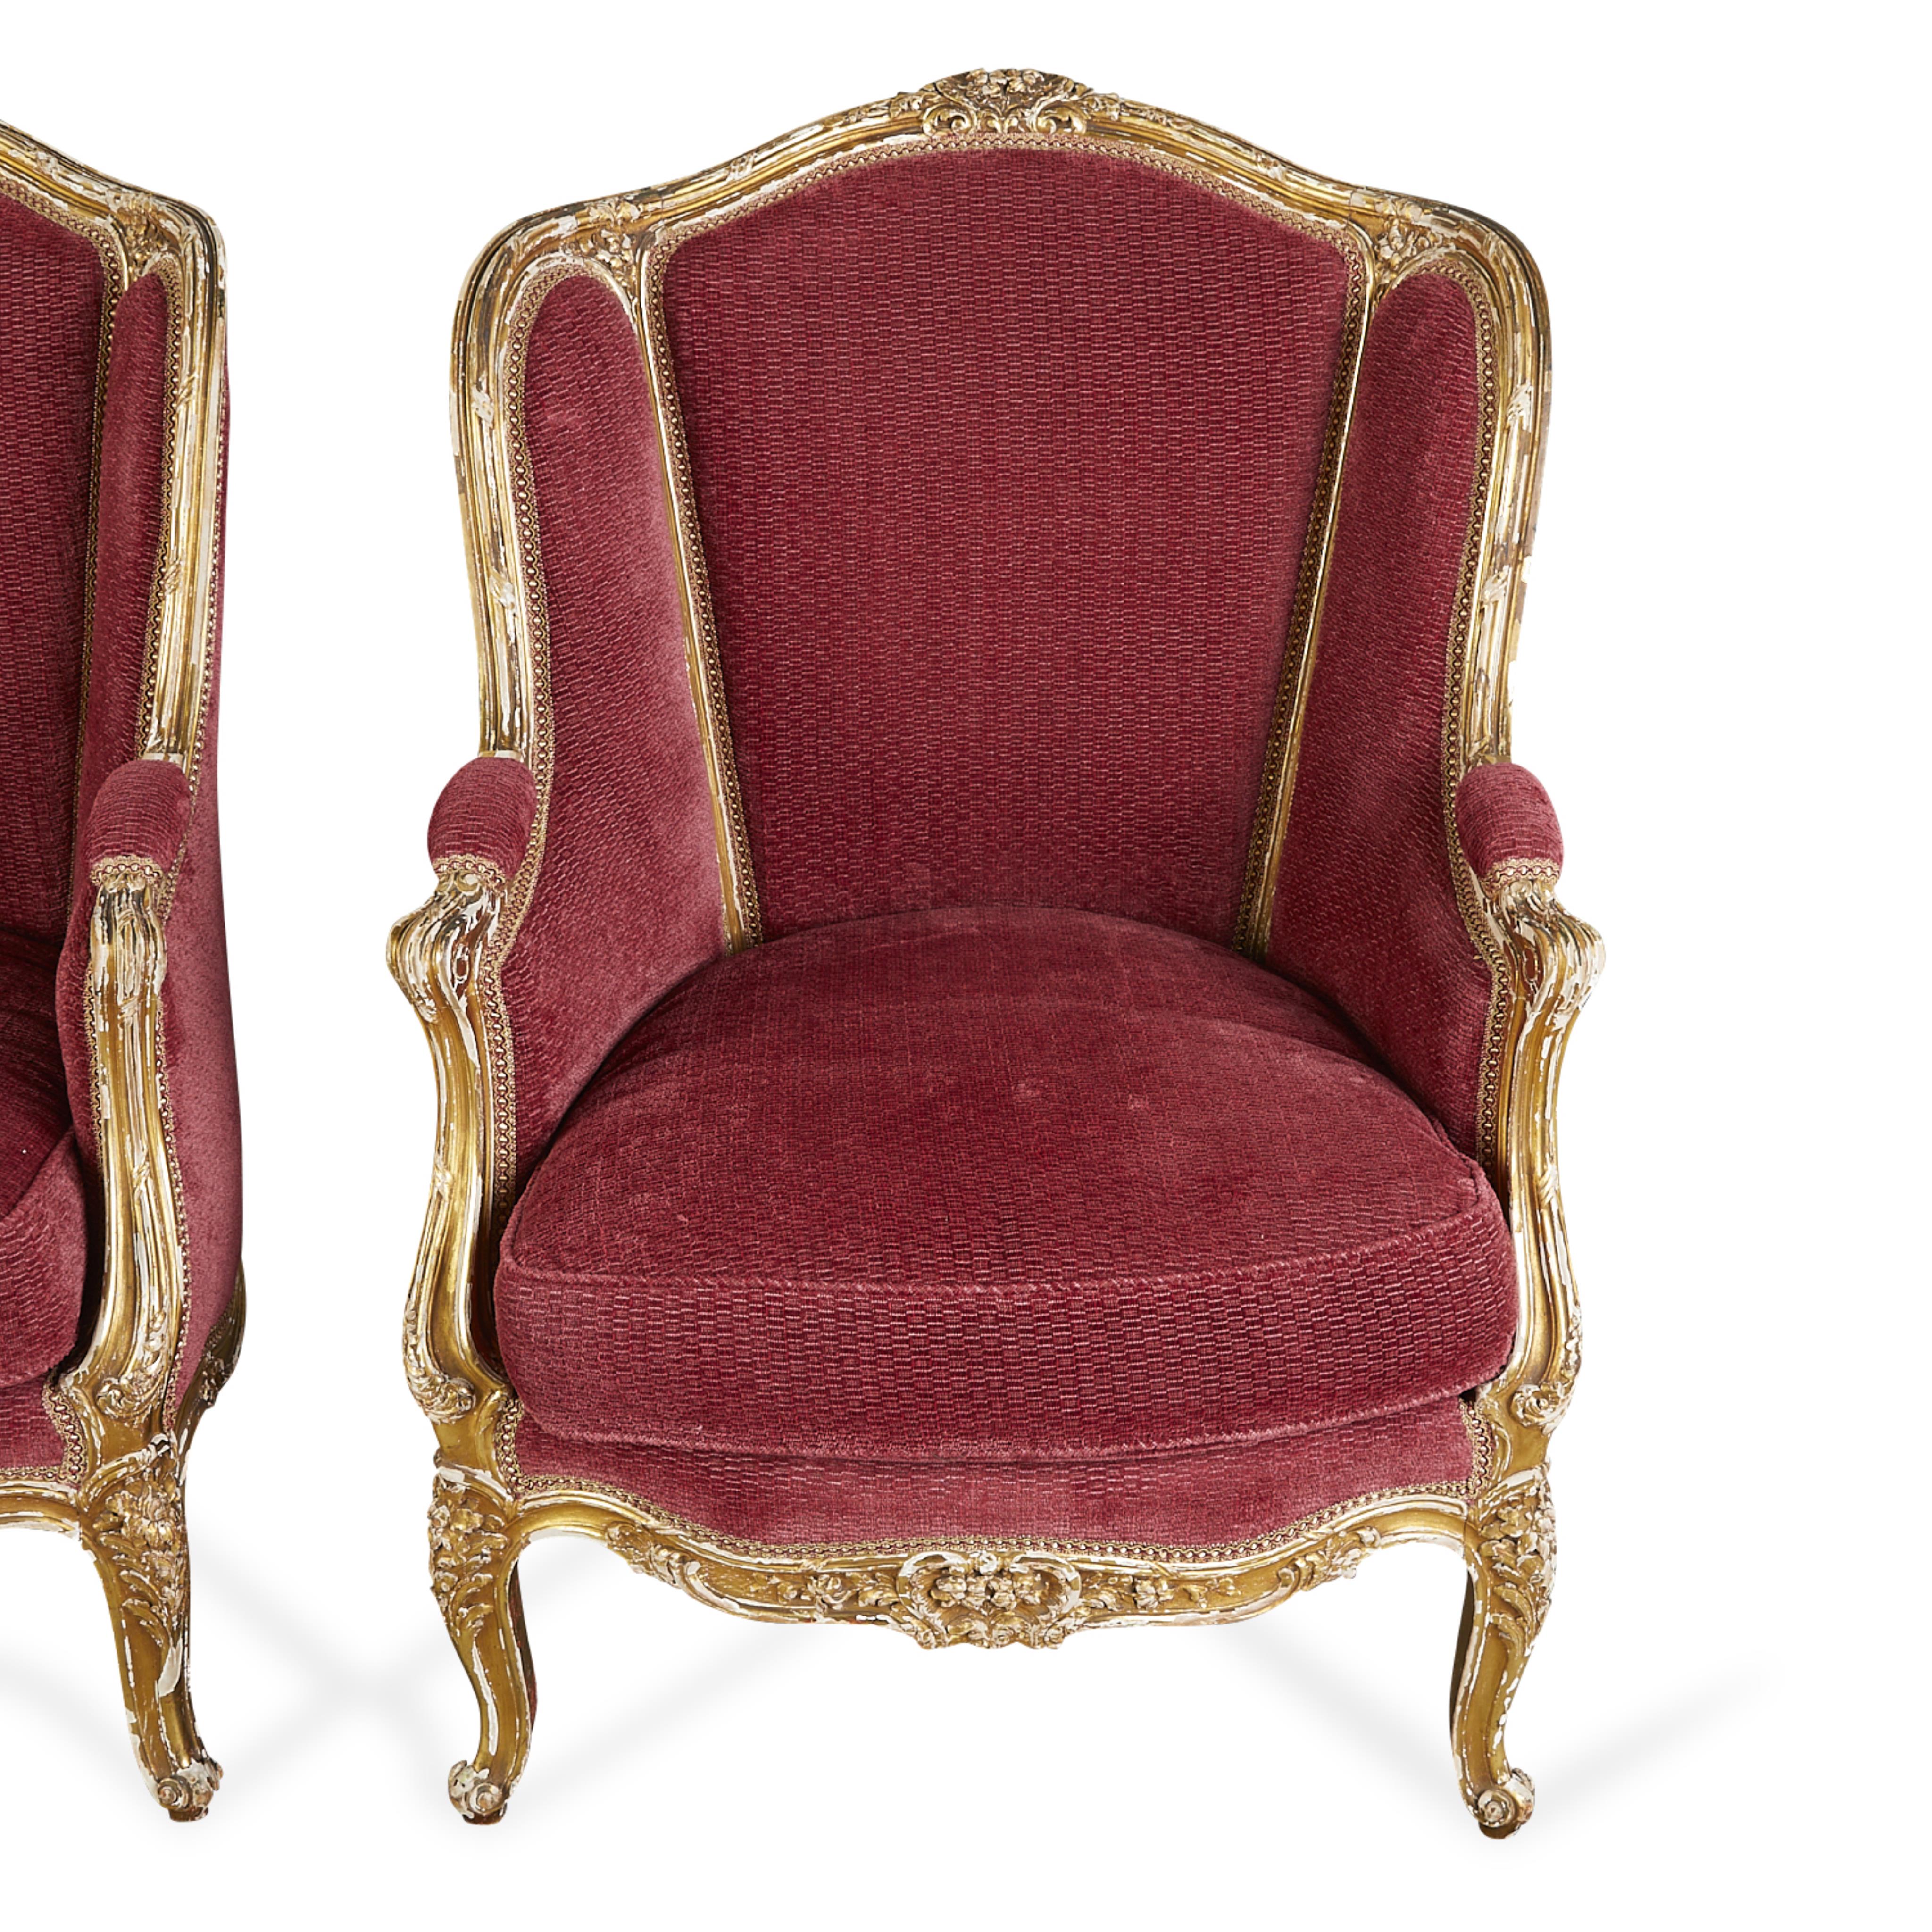 Pair of Louis XV Style Gilt Armchairs - Image 10 of 12